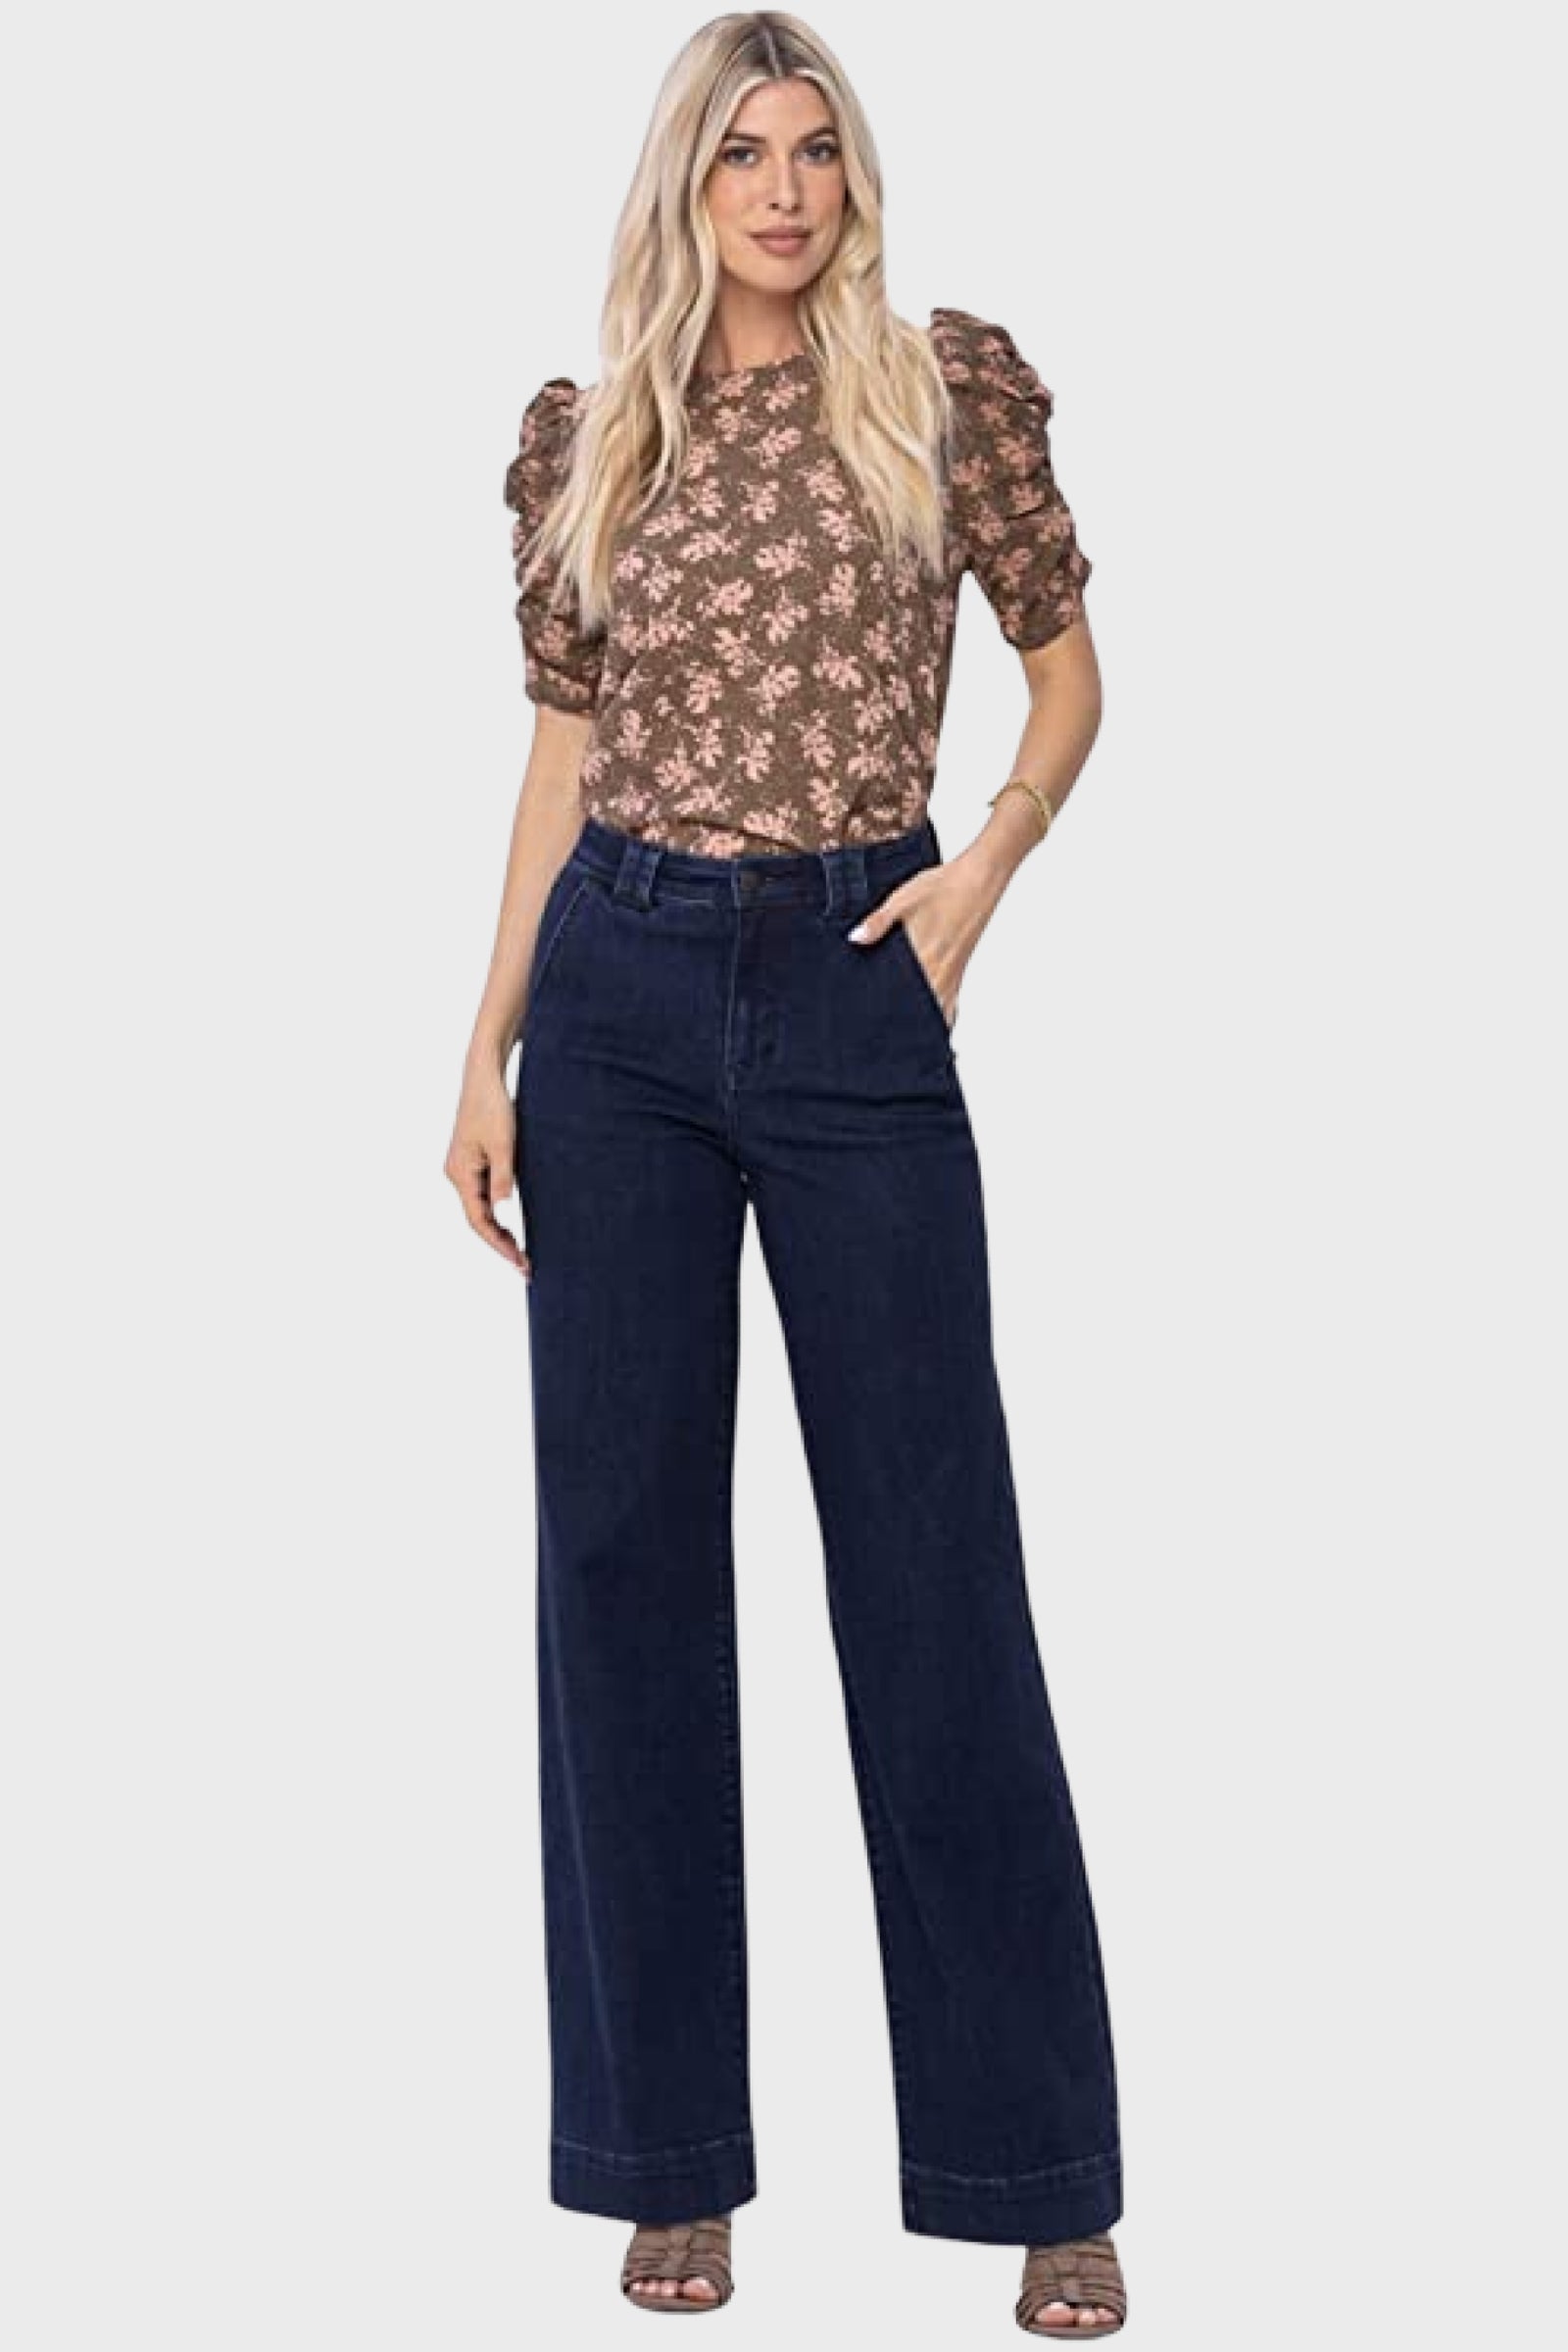 Judy Blue, High-Waisted Clean Wash Trouser Wide Hem Jeans Style 82471